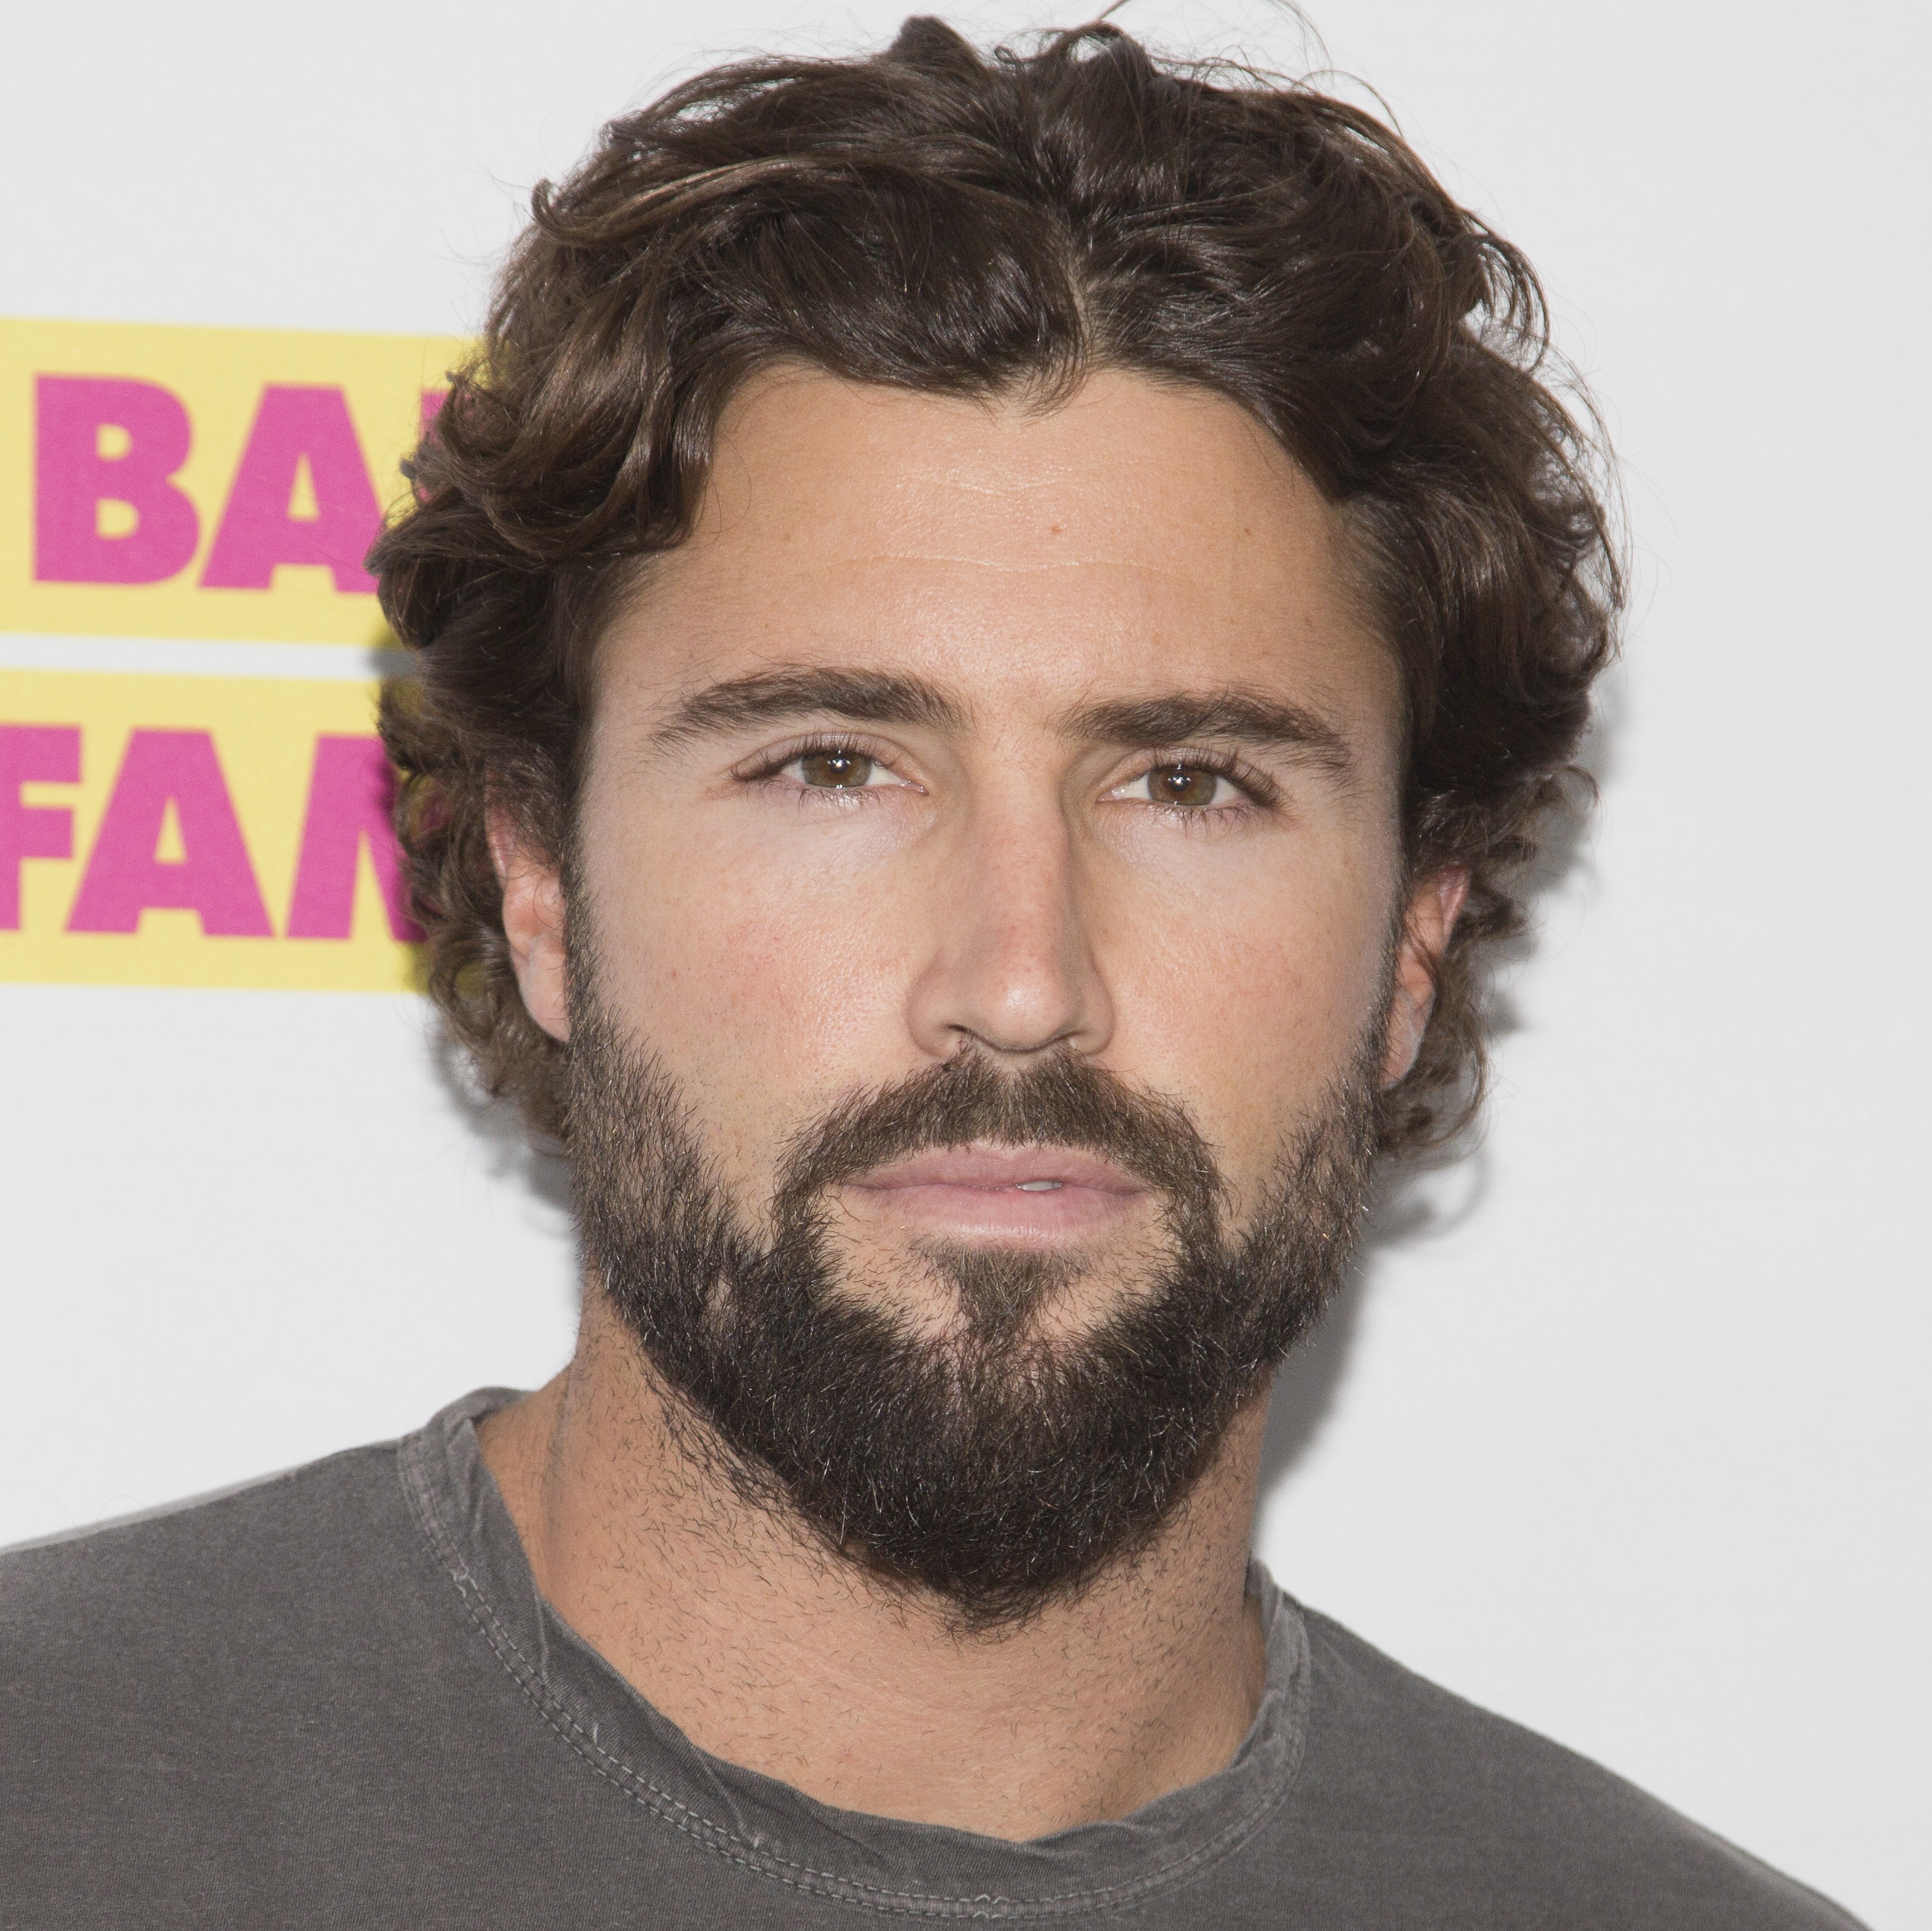 Brody Jenner Loses His Cool With Hotel Staff in Expletive-Filled Video -  Life & Style